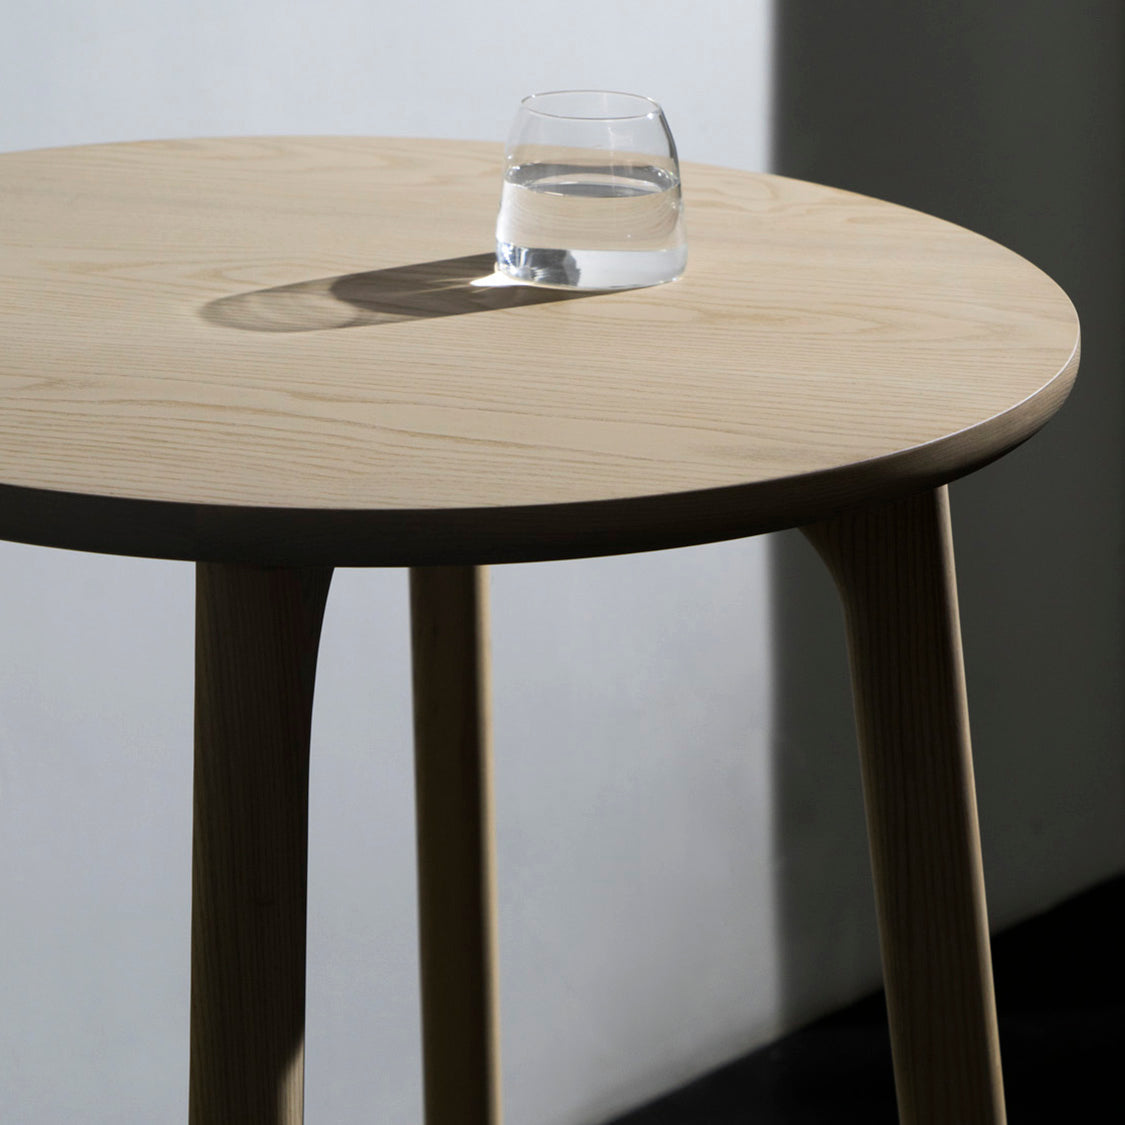 Utility Cafe Table